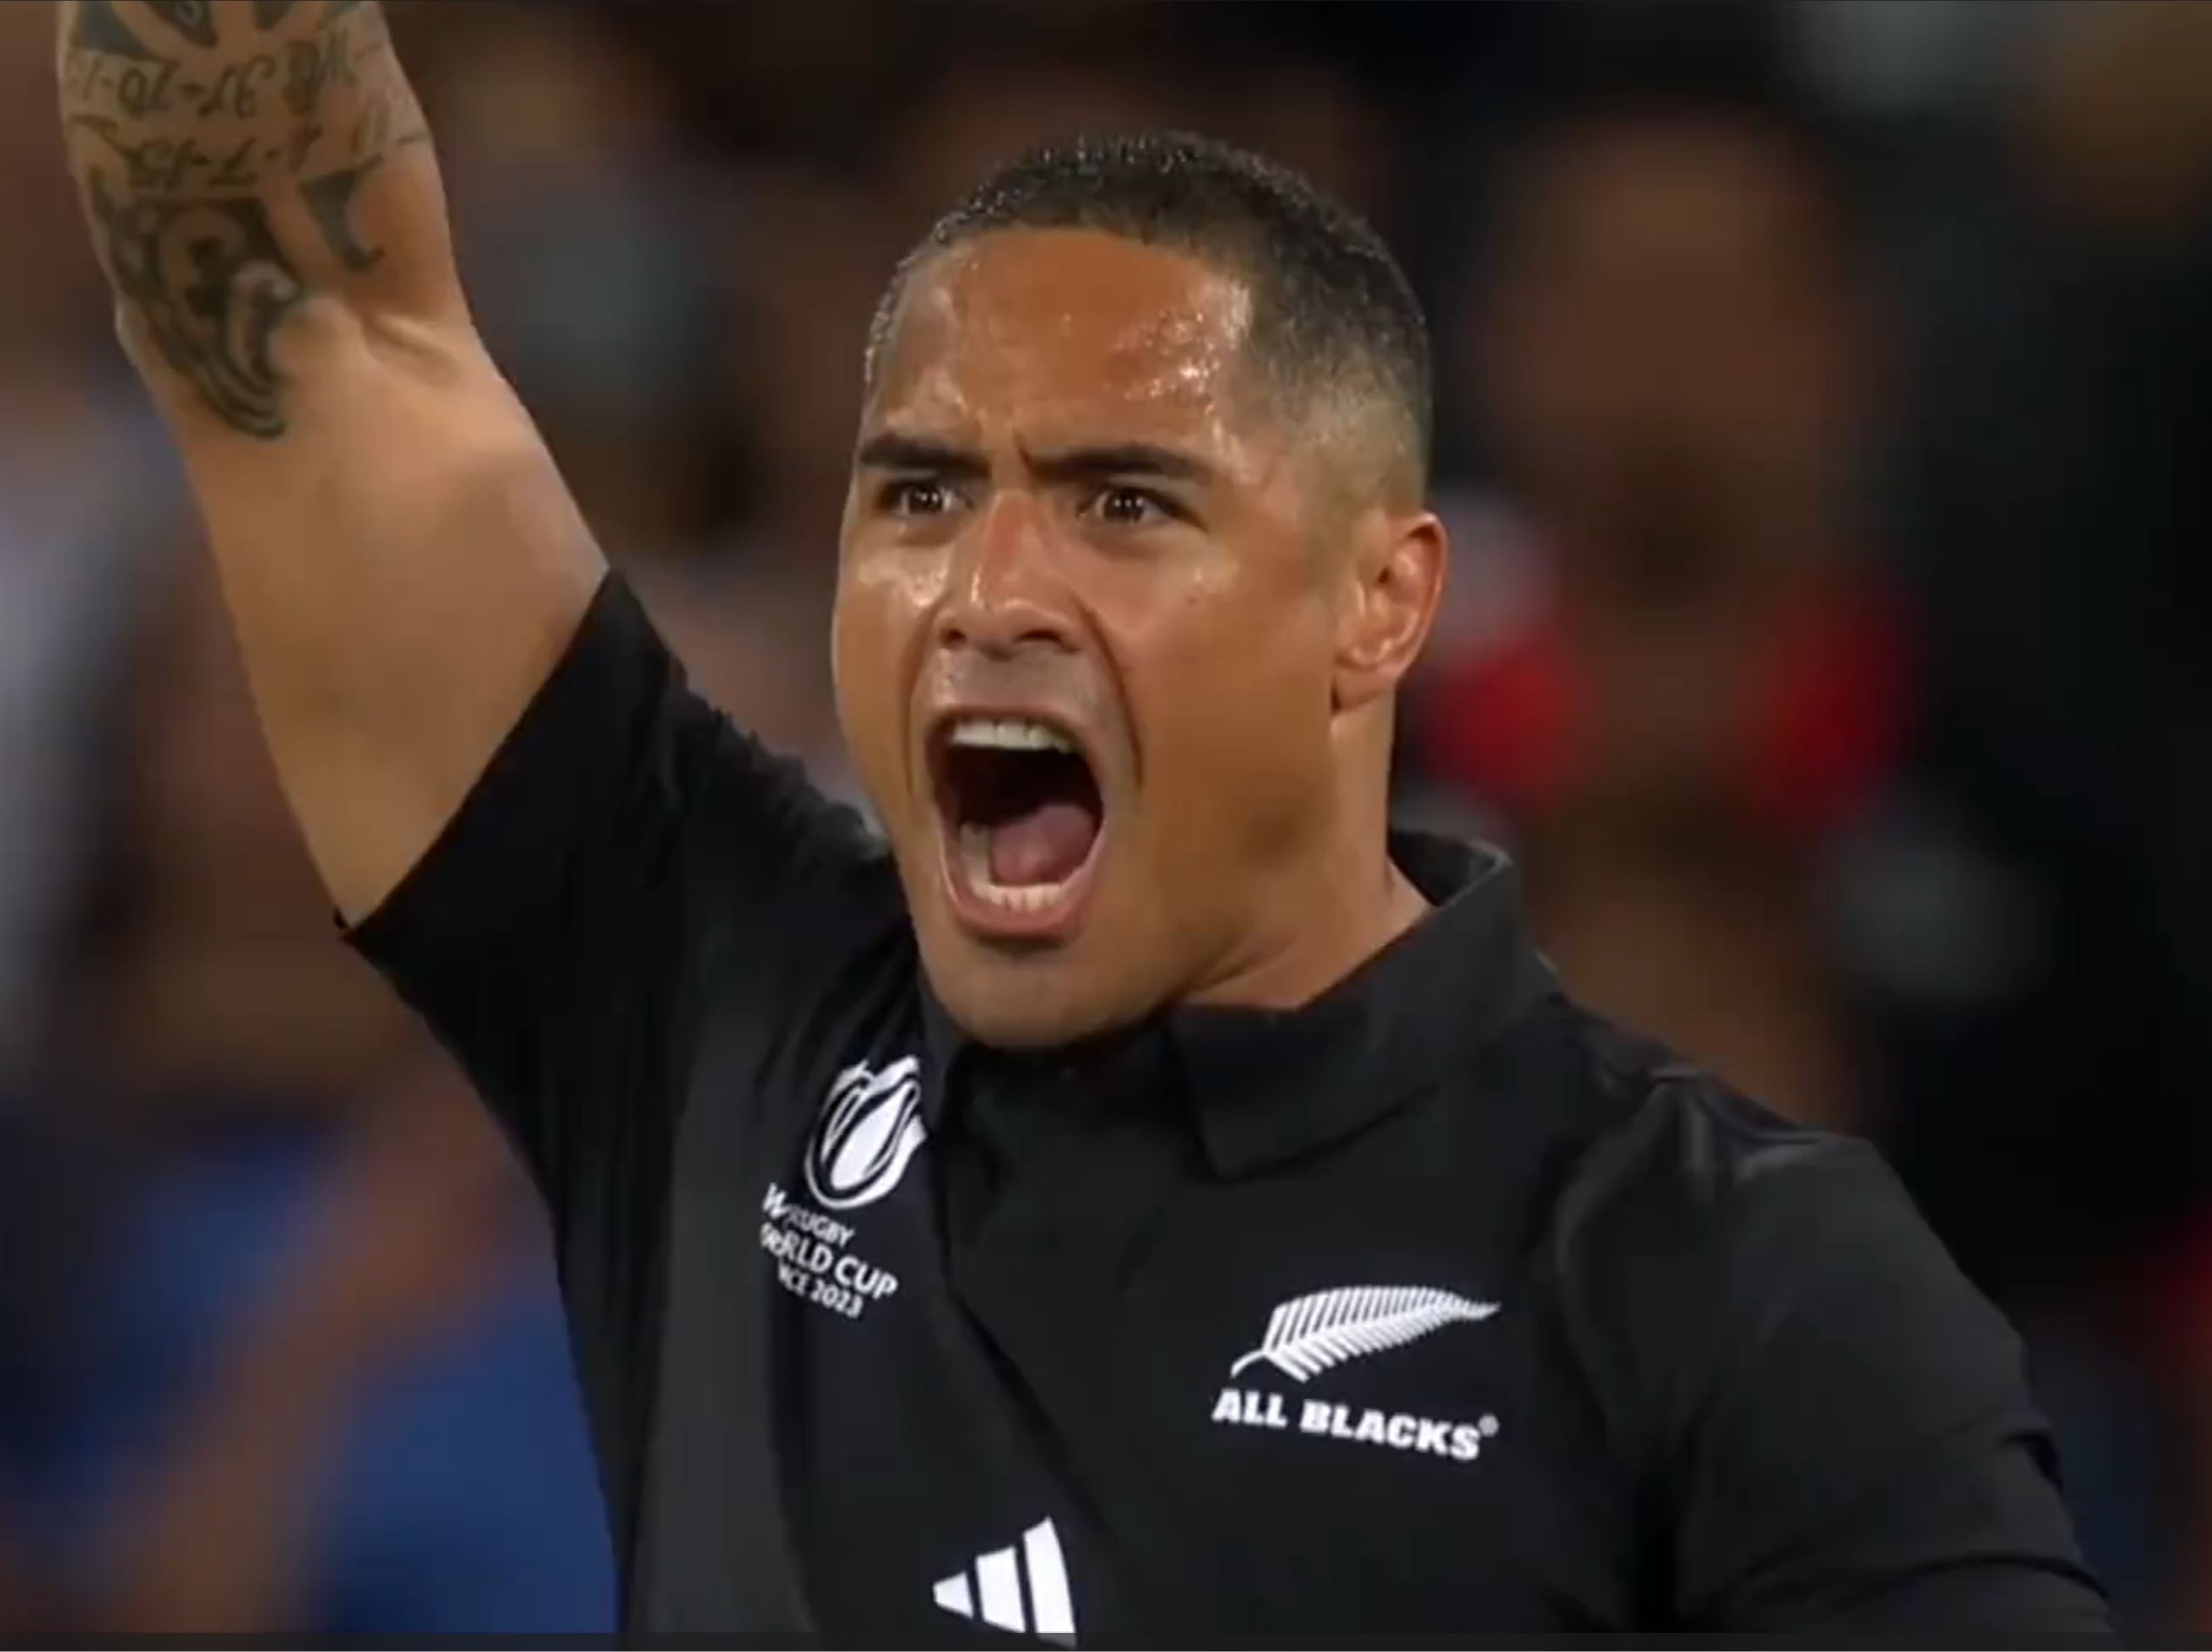 Management Strategy inspired by Rugby tactics from All Blacks Team and Haka dance